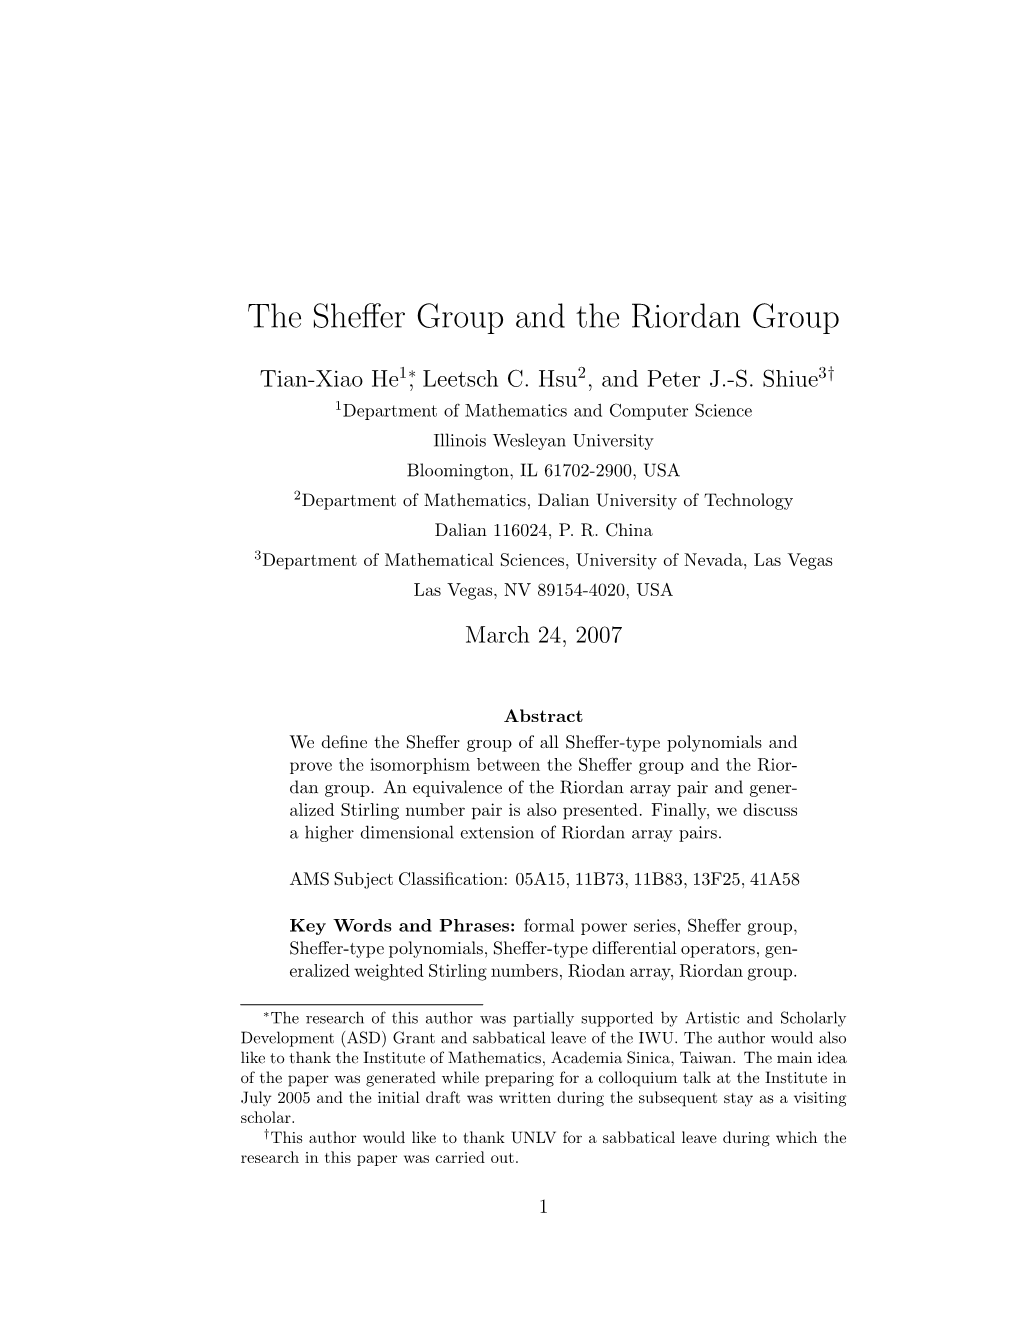 The Sheffer Group and the Riordan Group